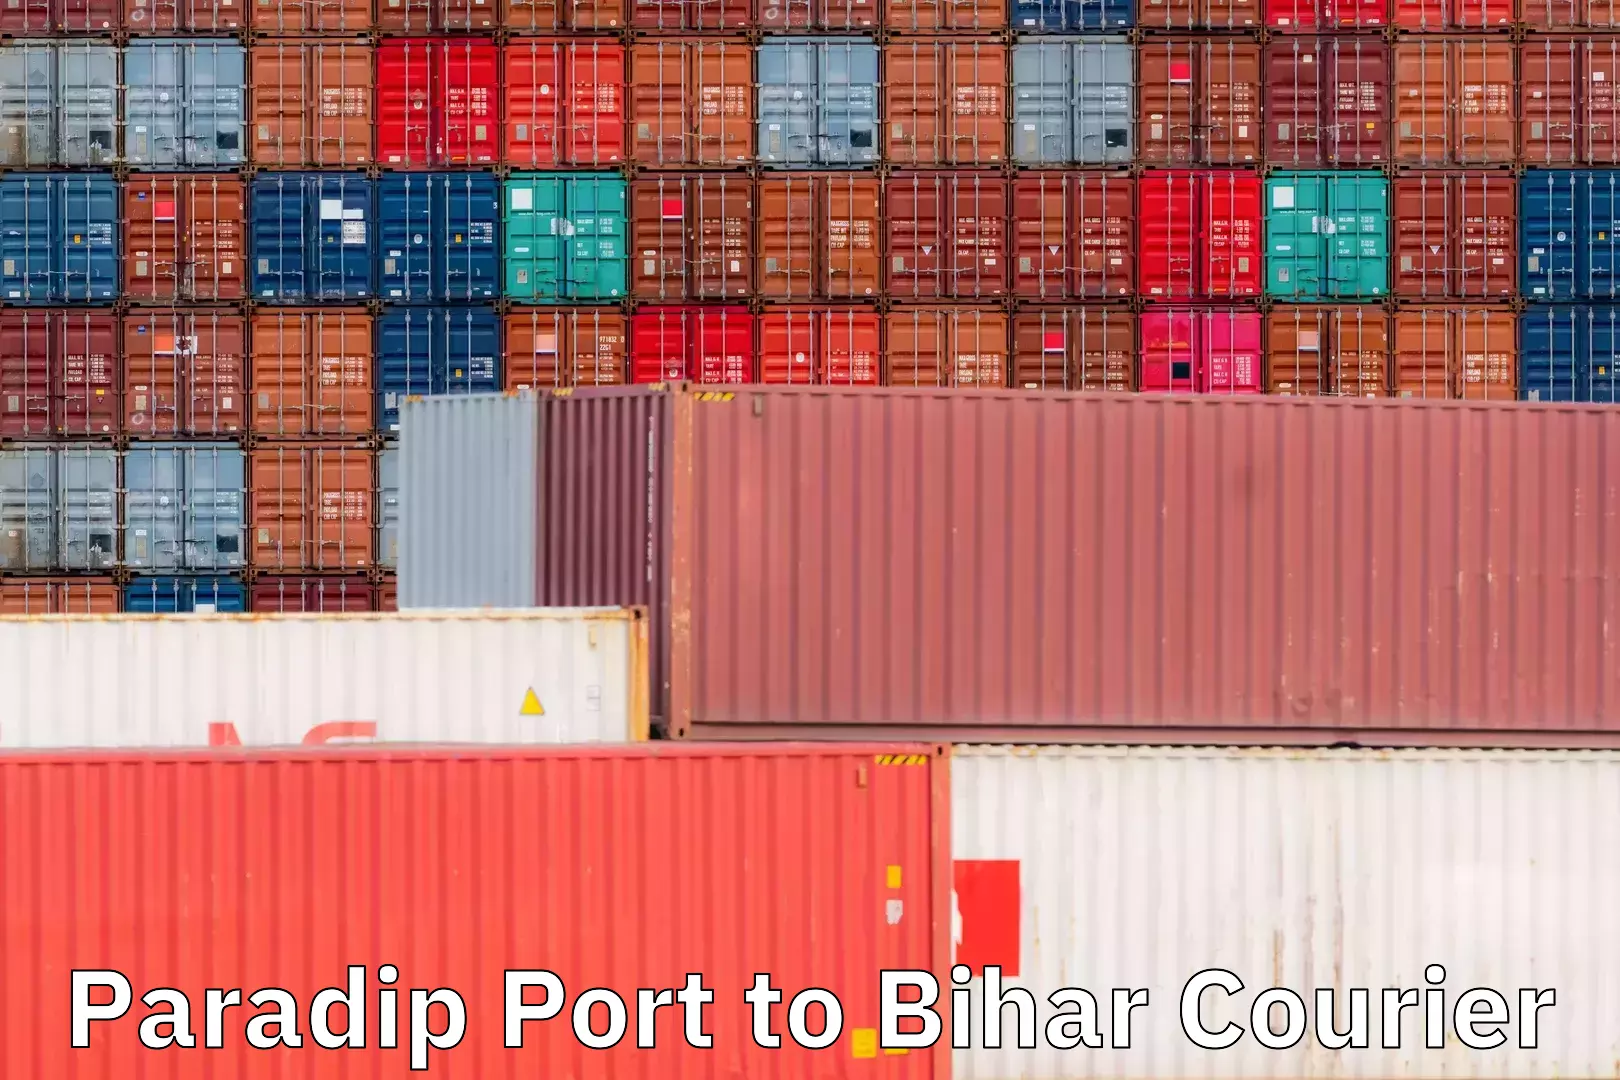 Small business couriers in Paradip Port to Bihar